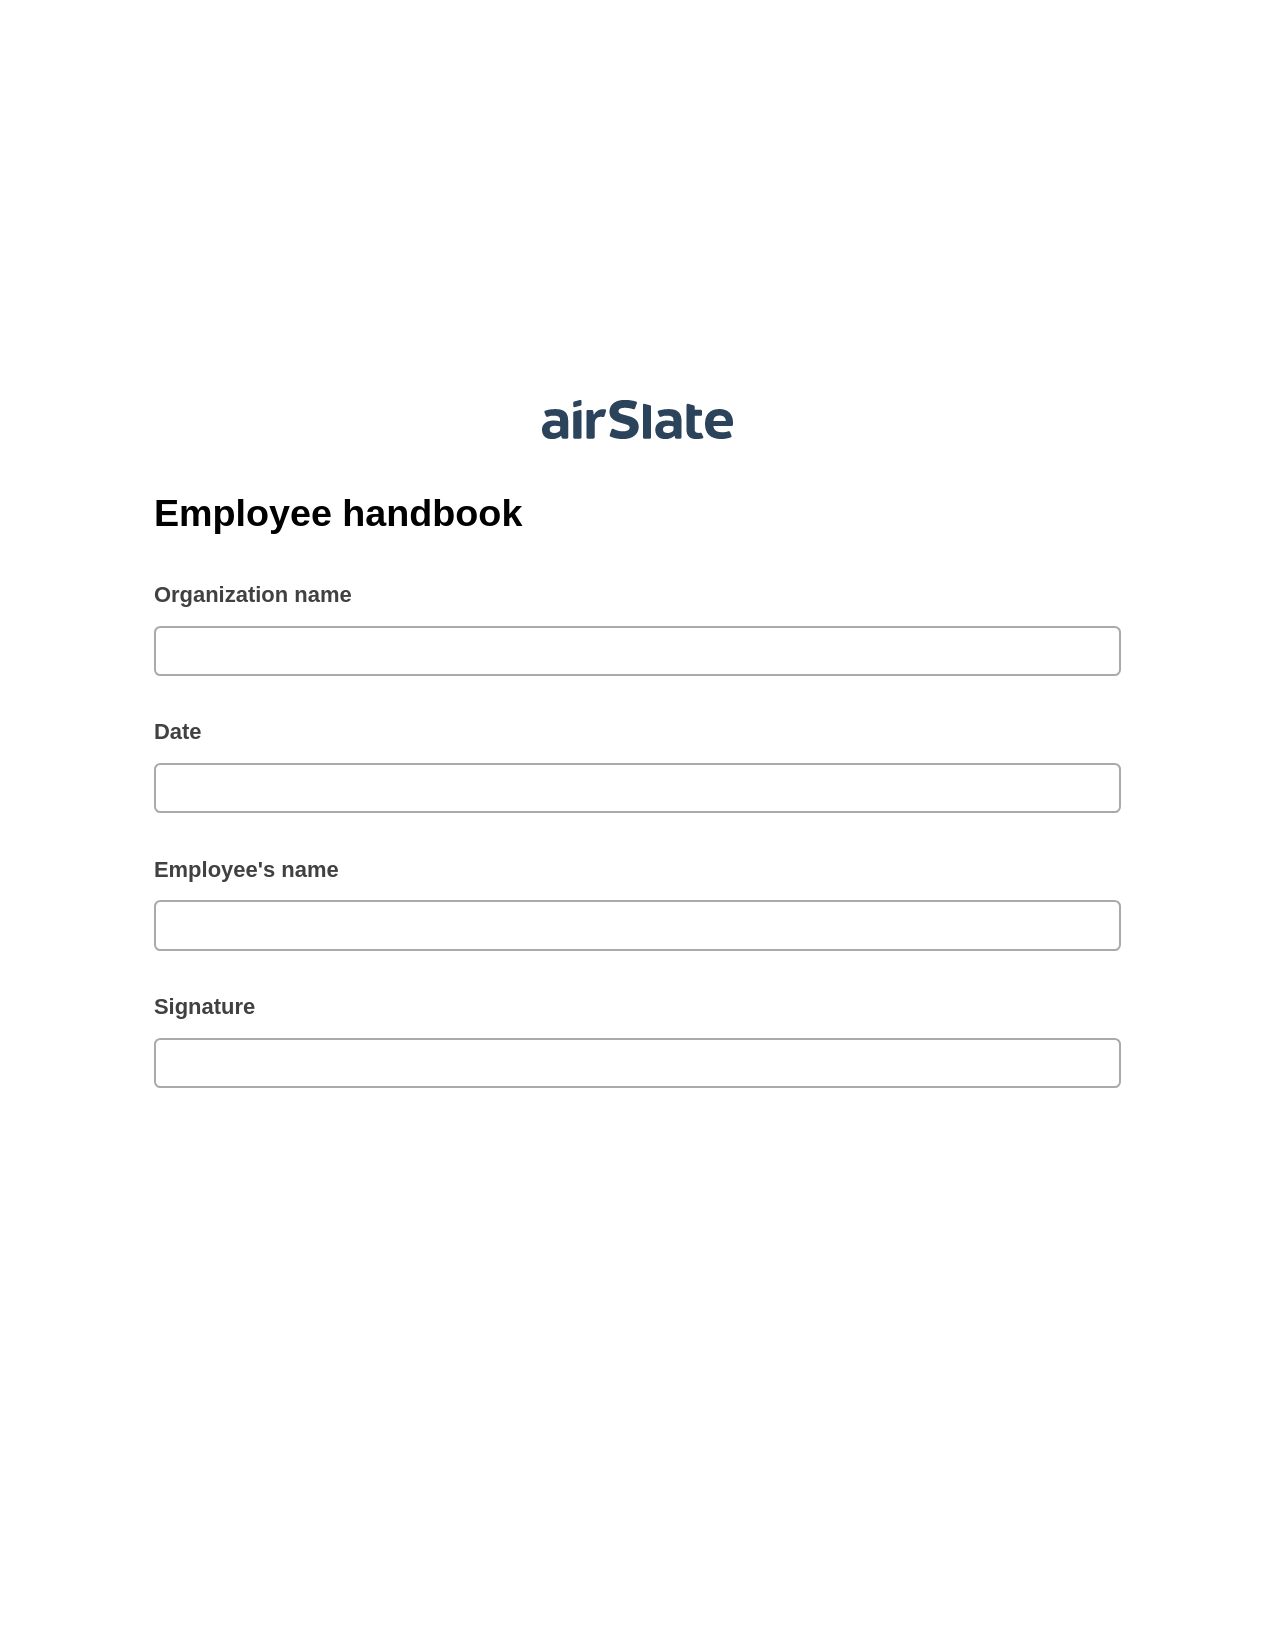 Employee handbook Pre-fill from Salesforce Record Bot, Lock the slate bot, Export to Excel 365 Bot